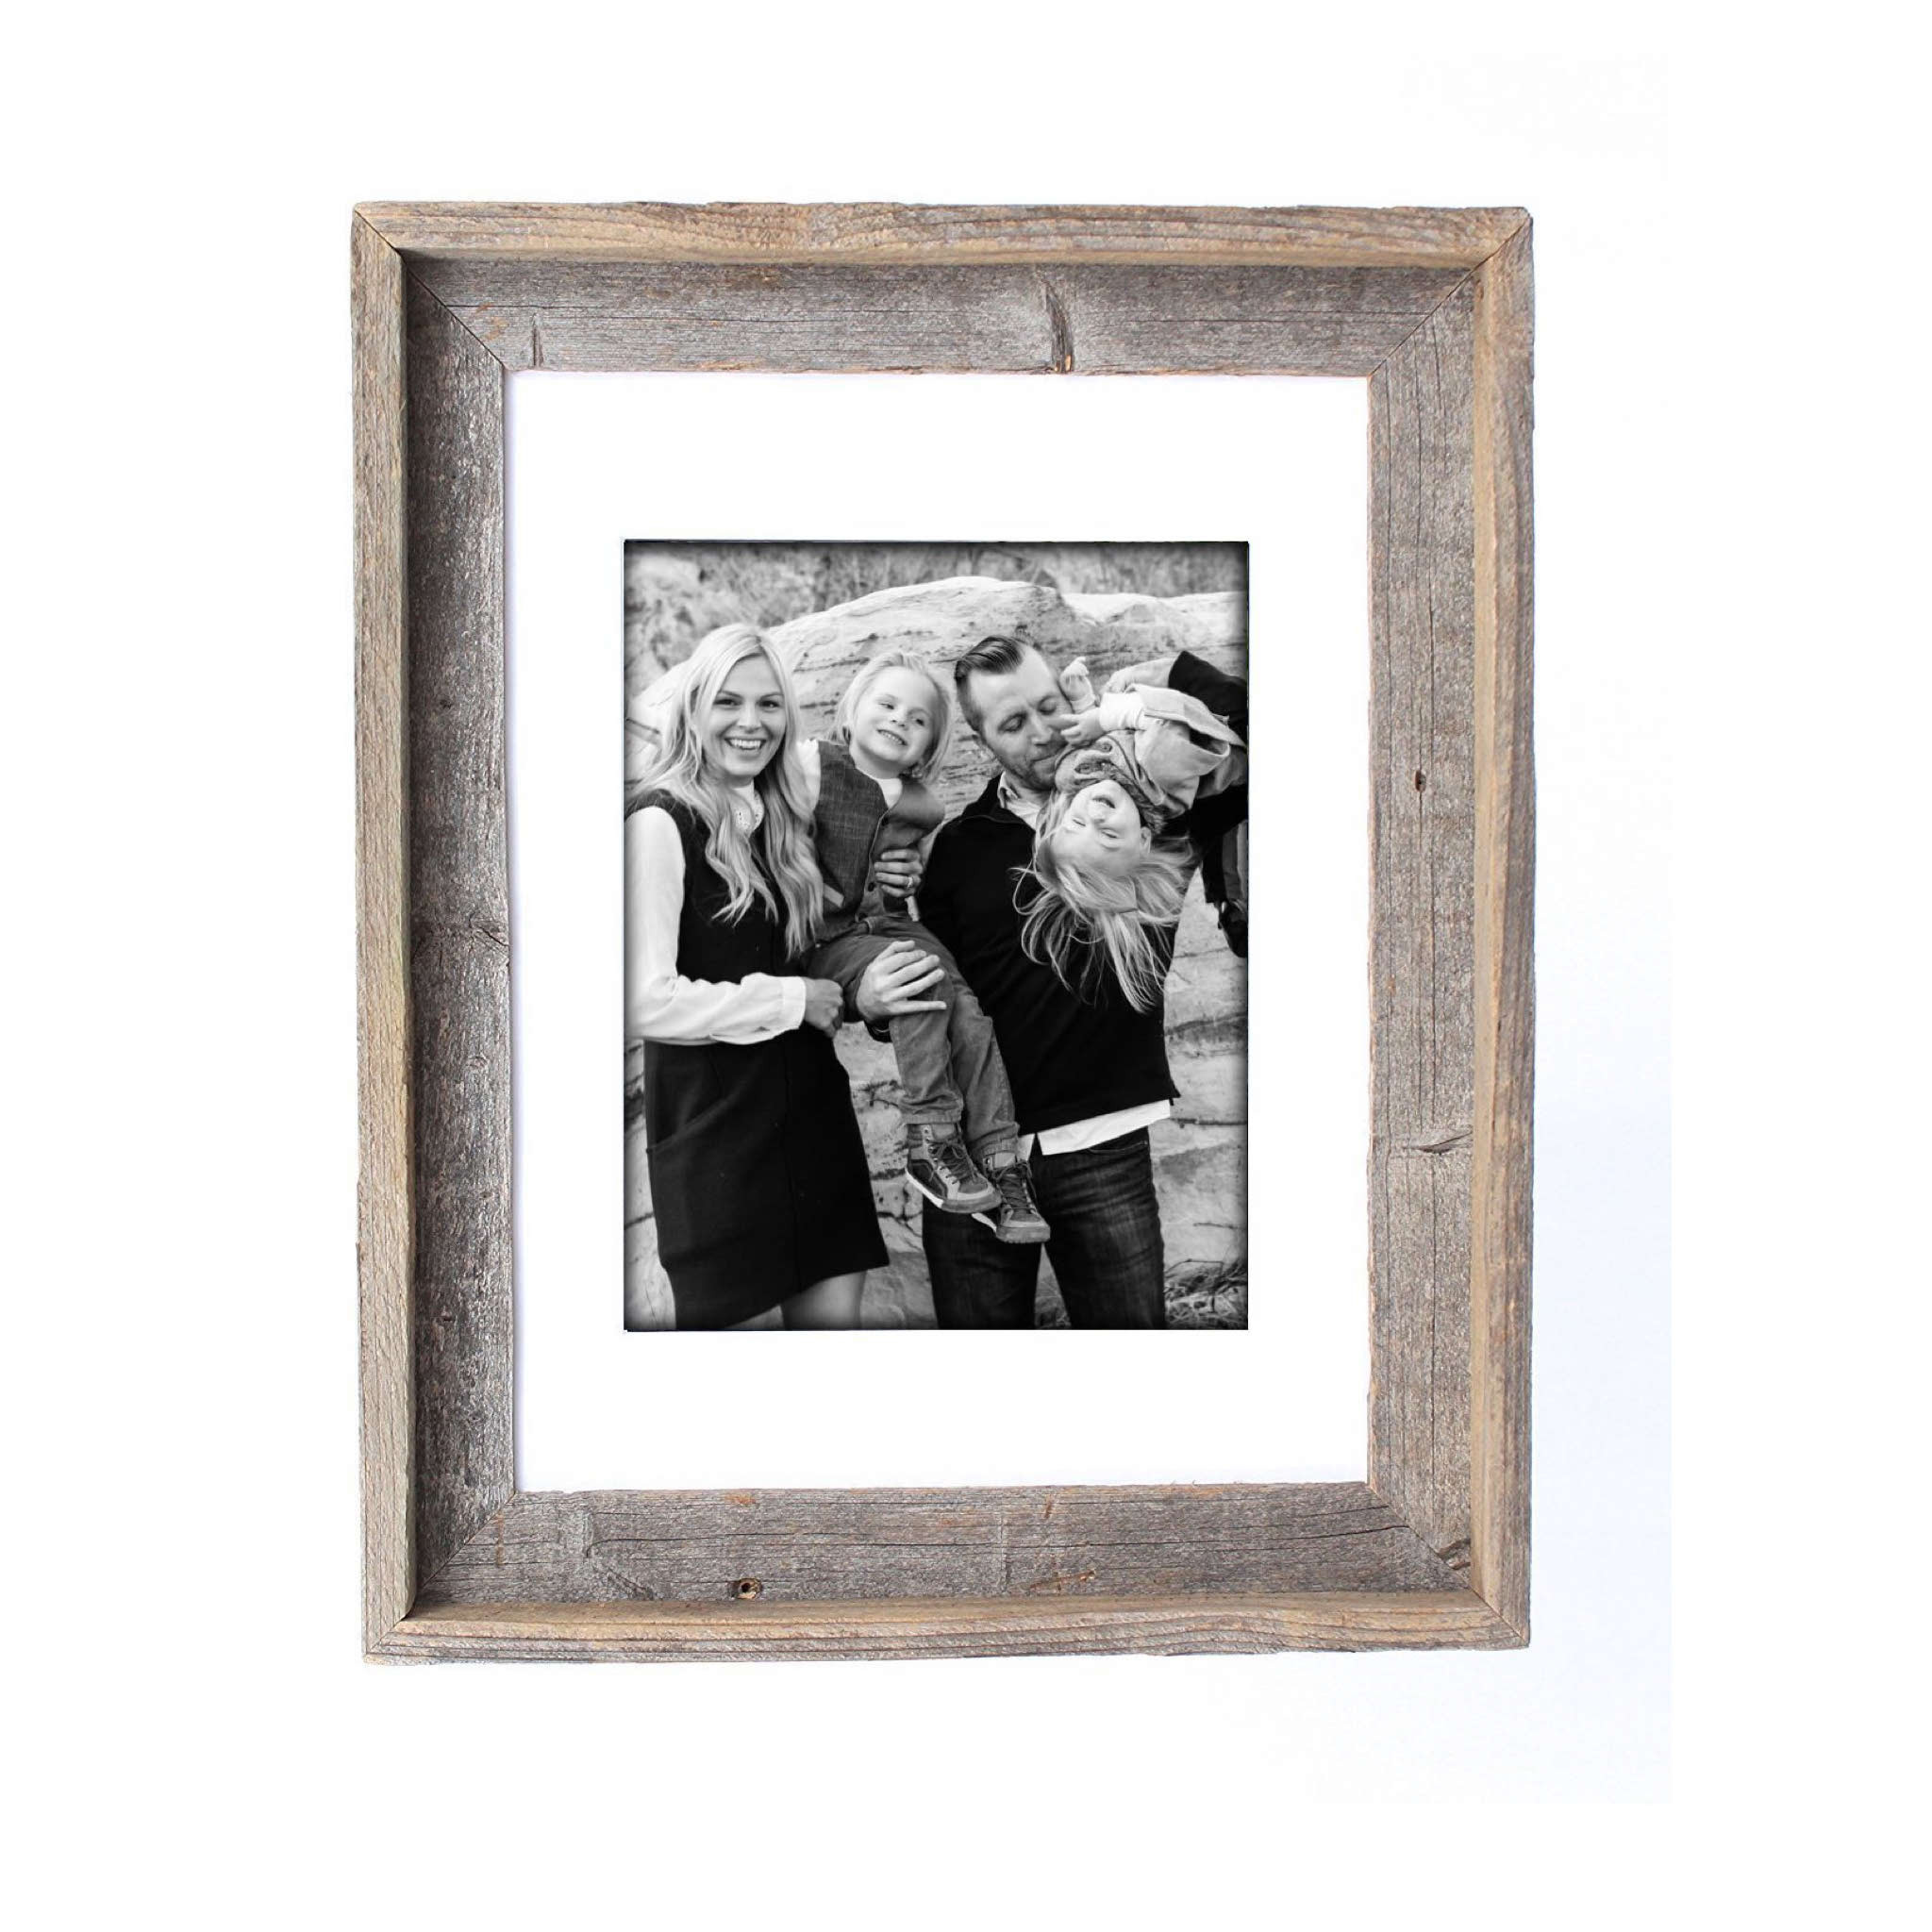 19"x23" Rustic White Picture Frame